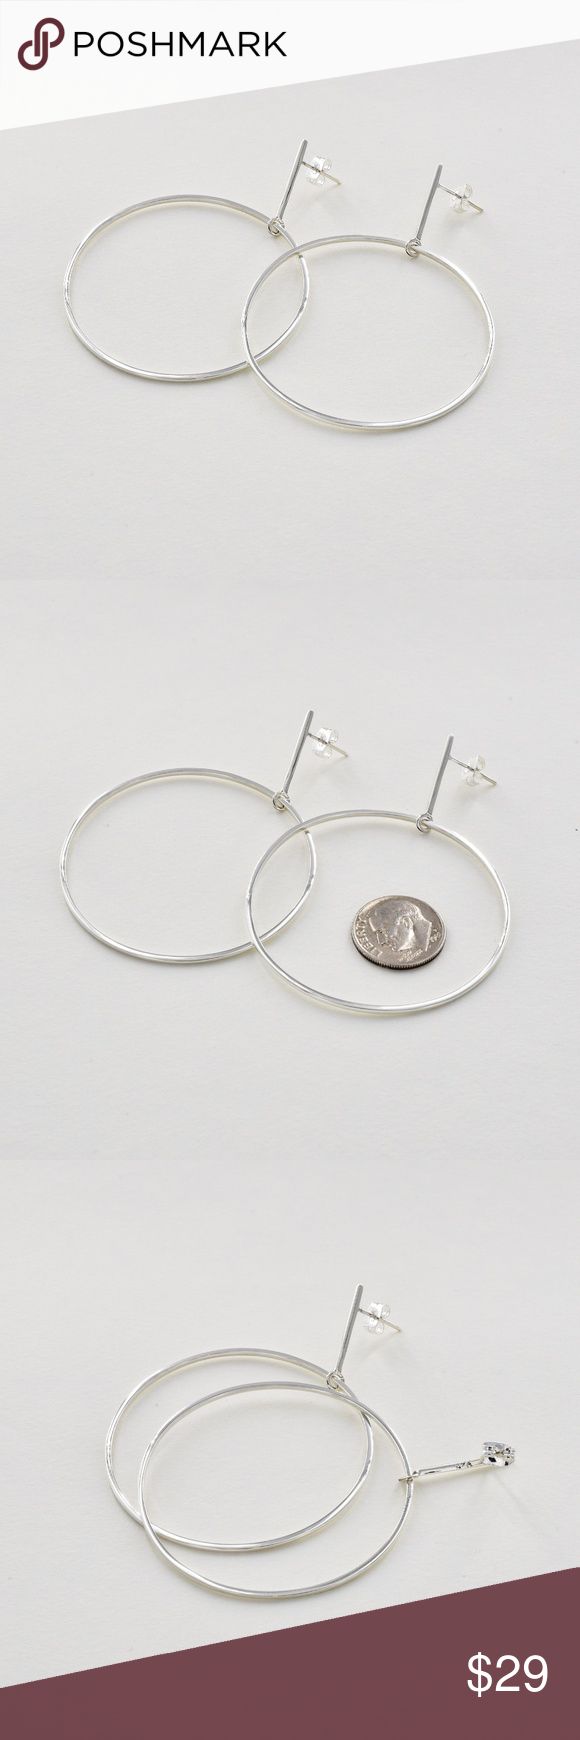 Large Modern 925 Hoop Earrings Hallmark 925 Made in Mexico Ships in two days Dia...